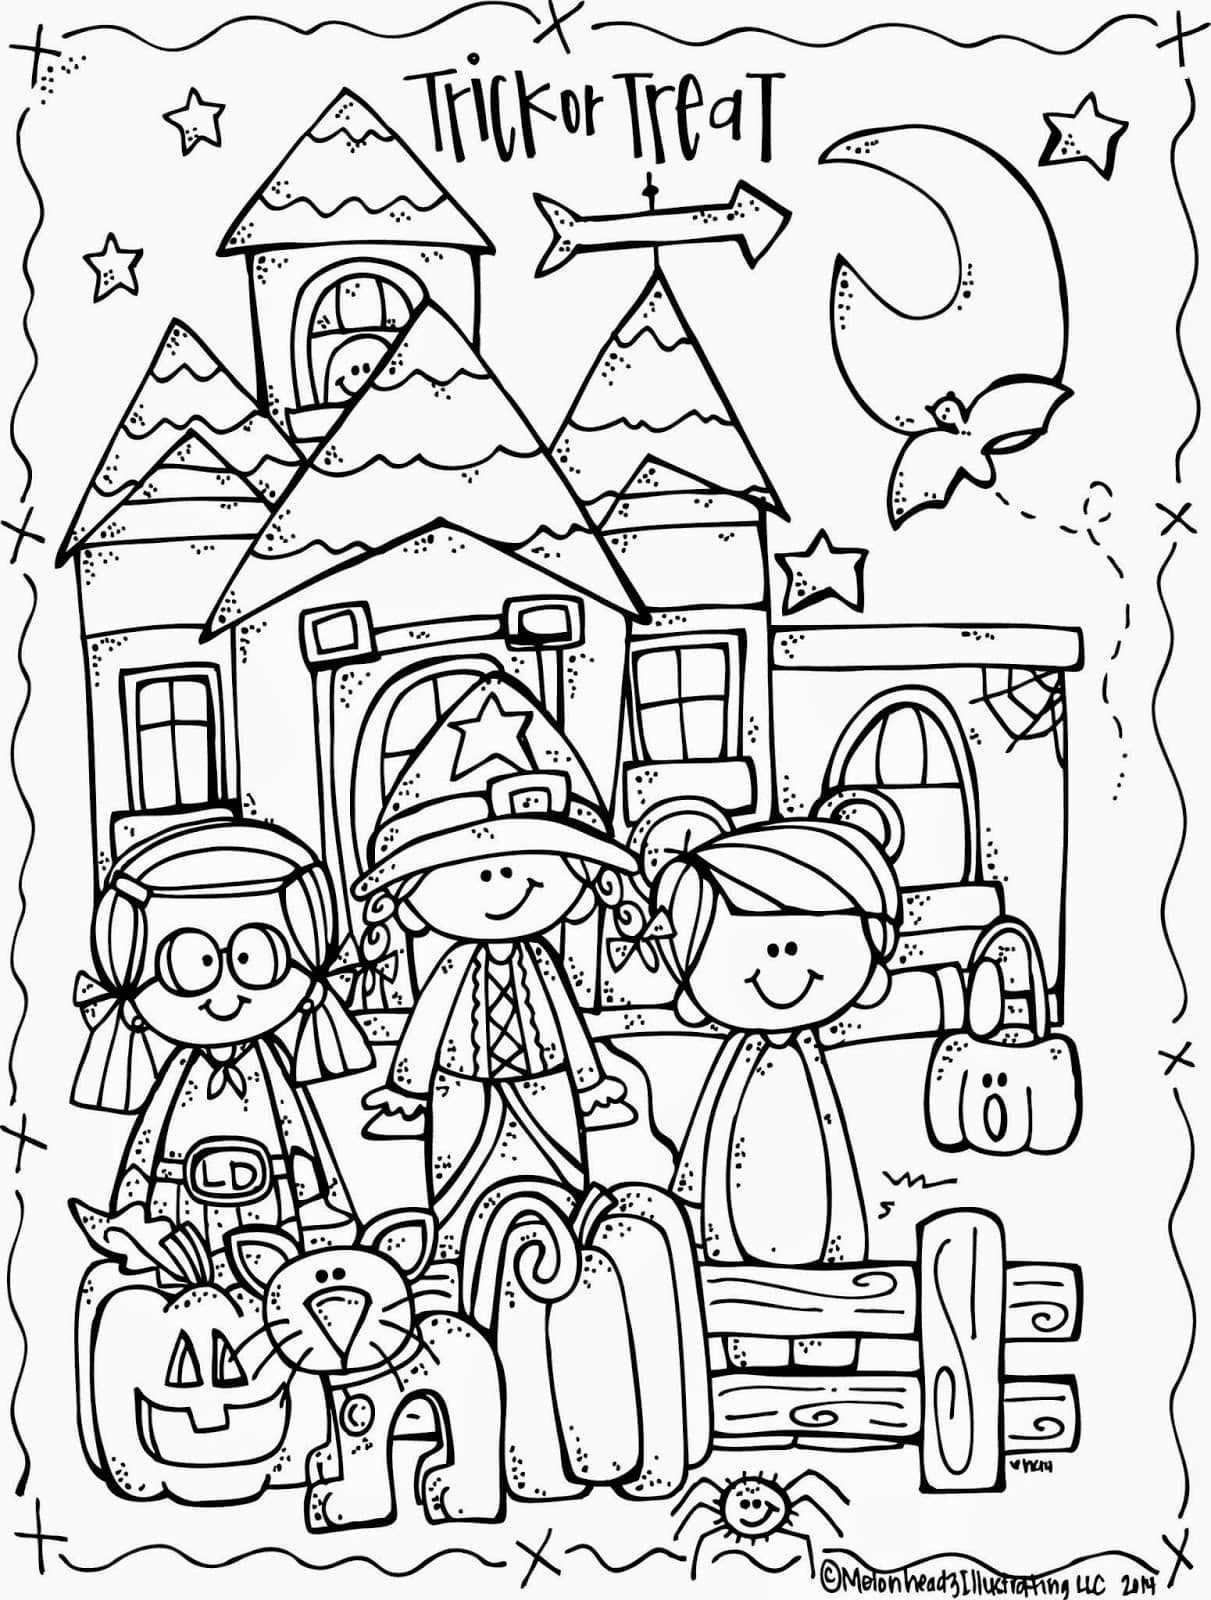 Trick or Treat | best halloween coloring pages for adults| free printable halloween coloring pages for adults only